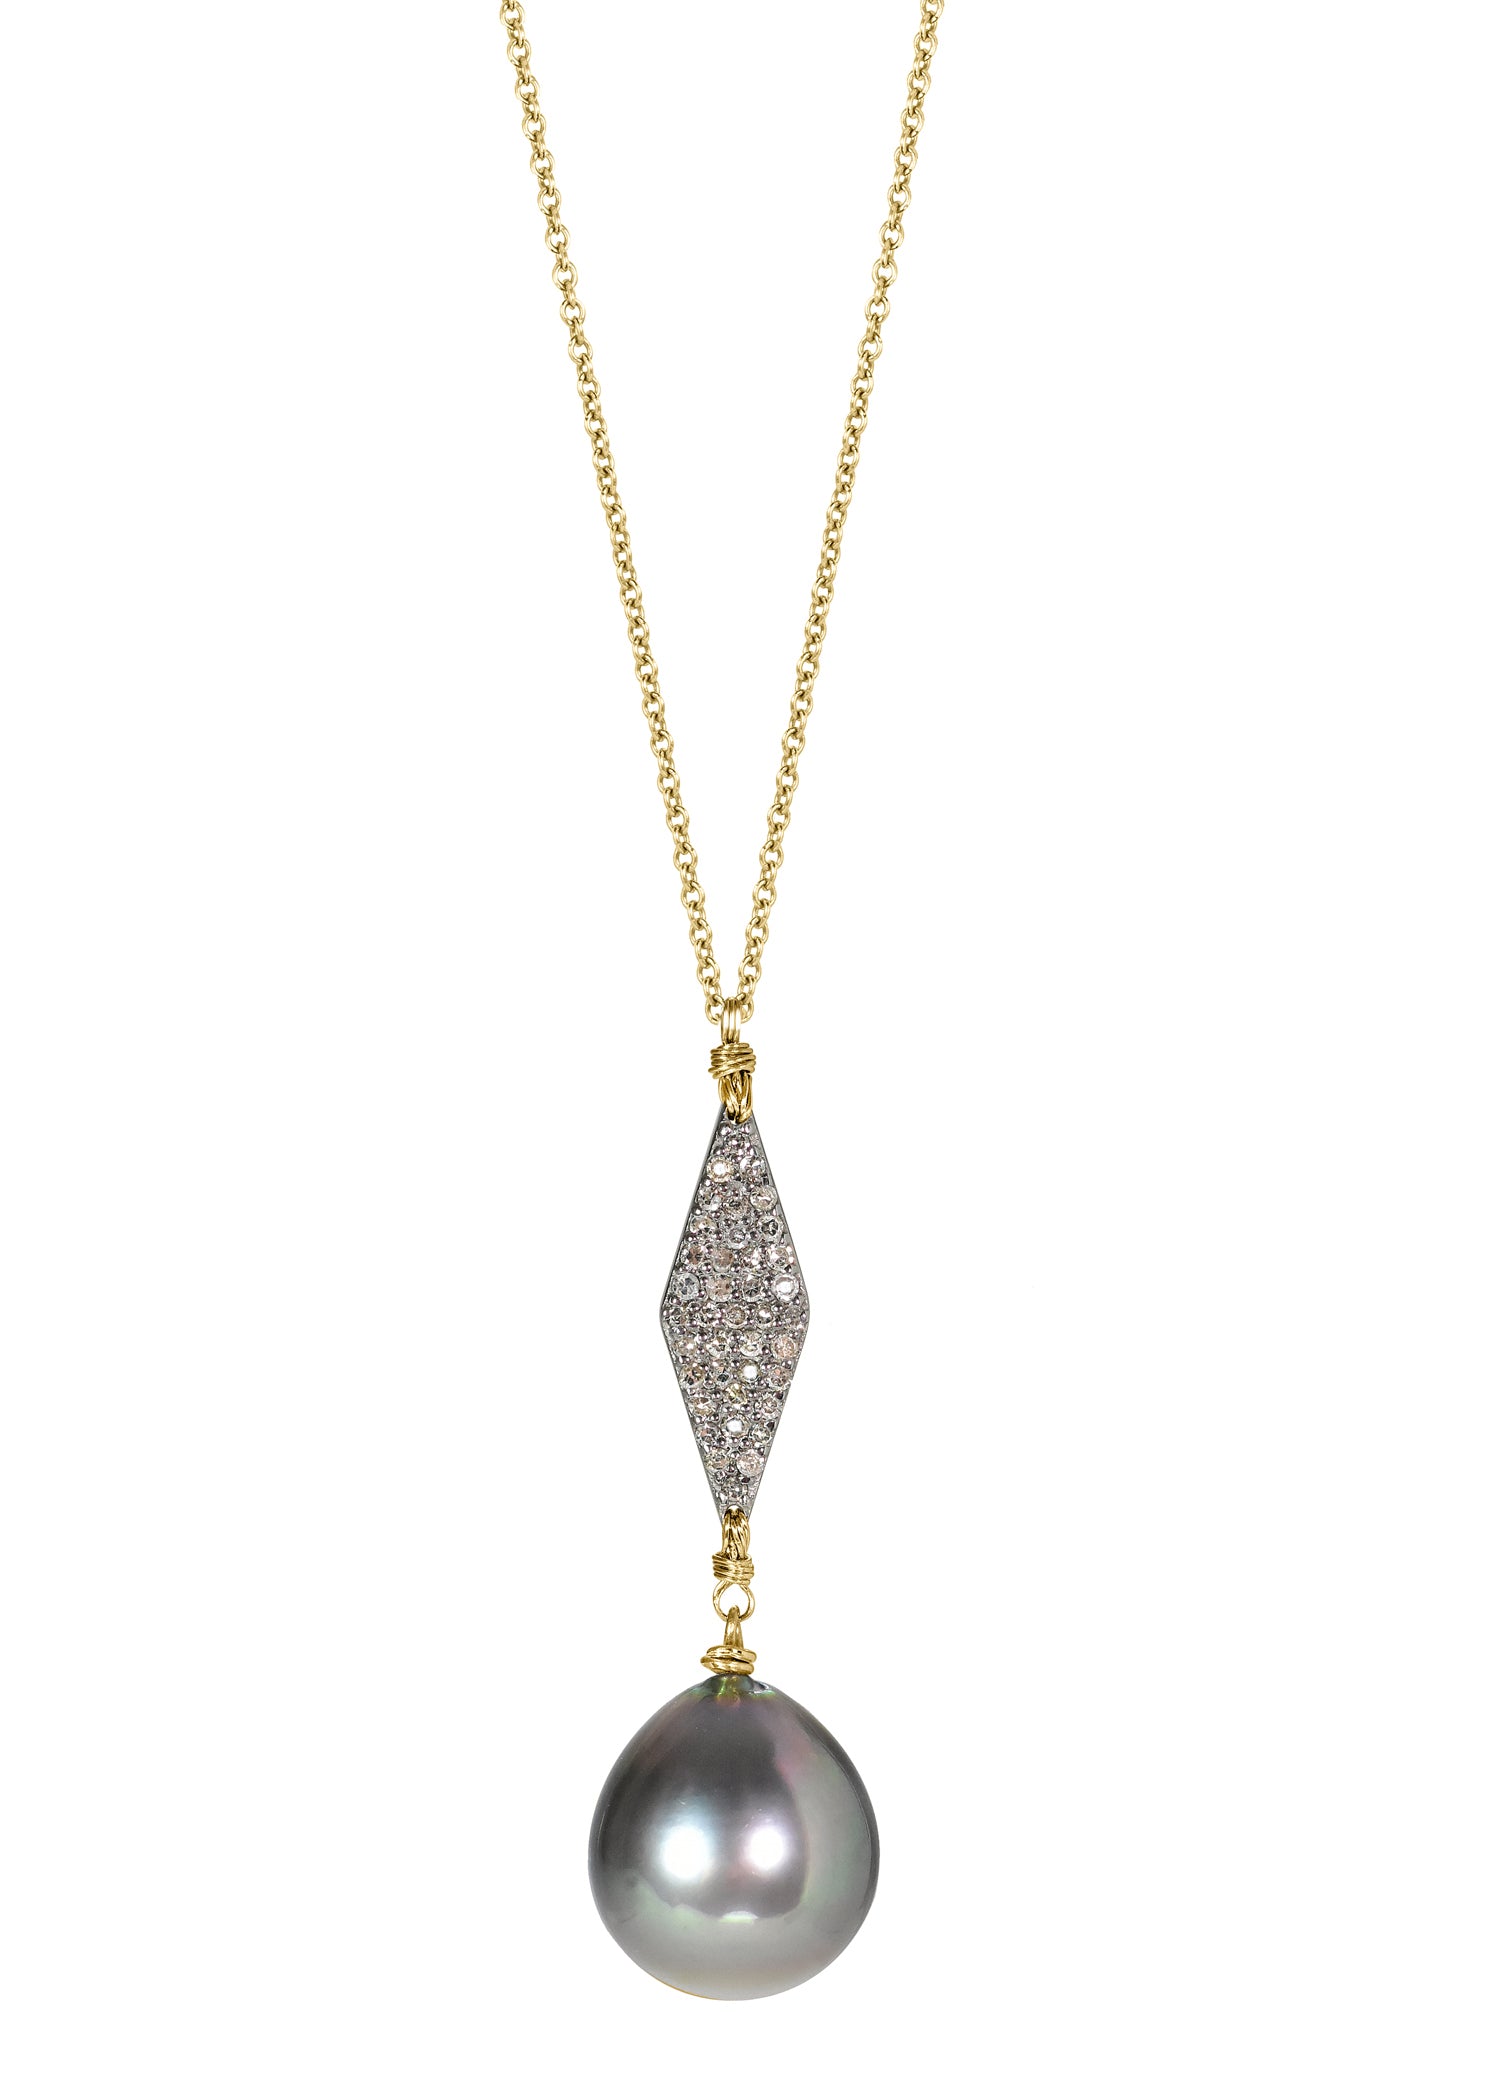 Diamond Tahitian pearl 14k gold Sterling silver Mixed metal Necklace measures 30" in length Pendant measures 1-1/2" in length and 1/2" in width at the widest point Handmade in our Los Angeles studio